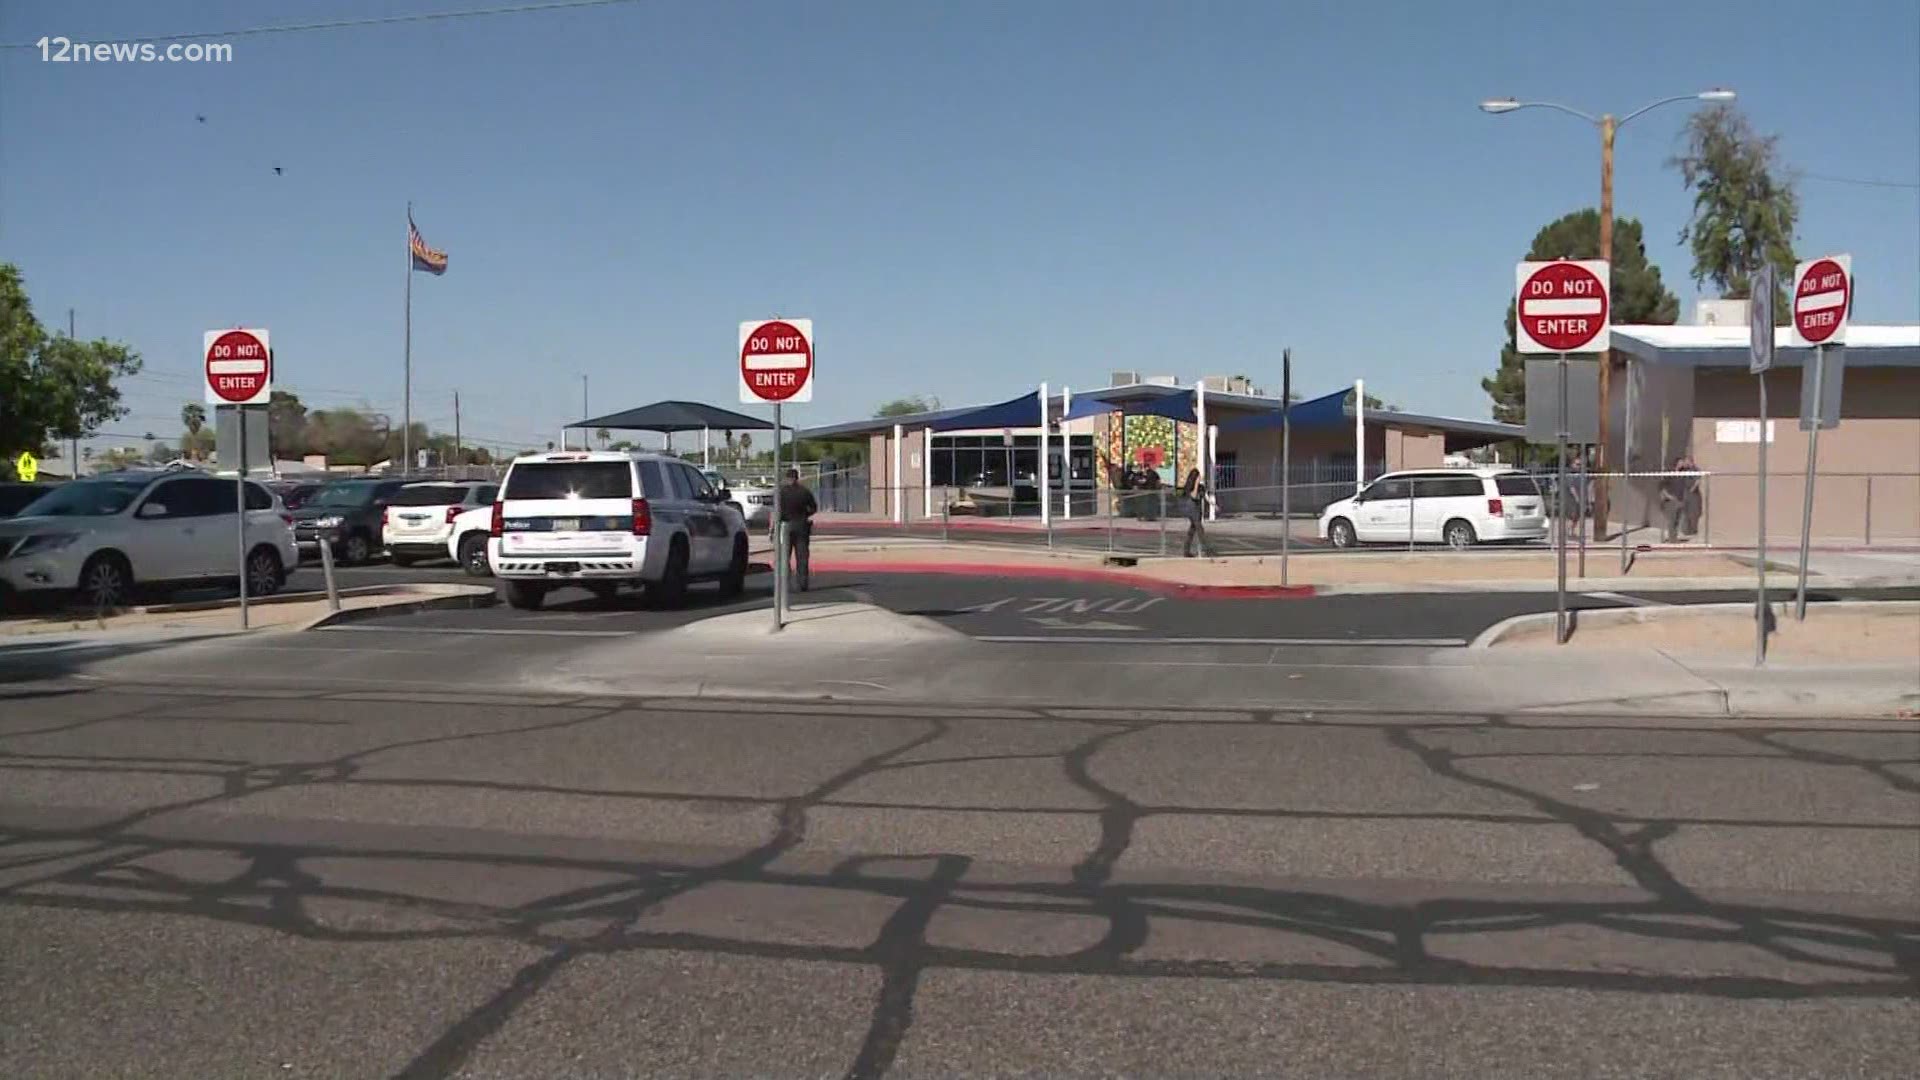 A teenager was carjacked outside of a Phoenix elementary school Tuesday. Jen Wahl has the details.